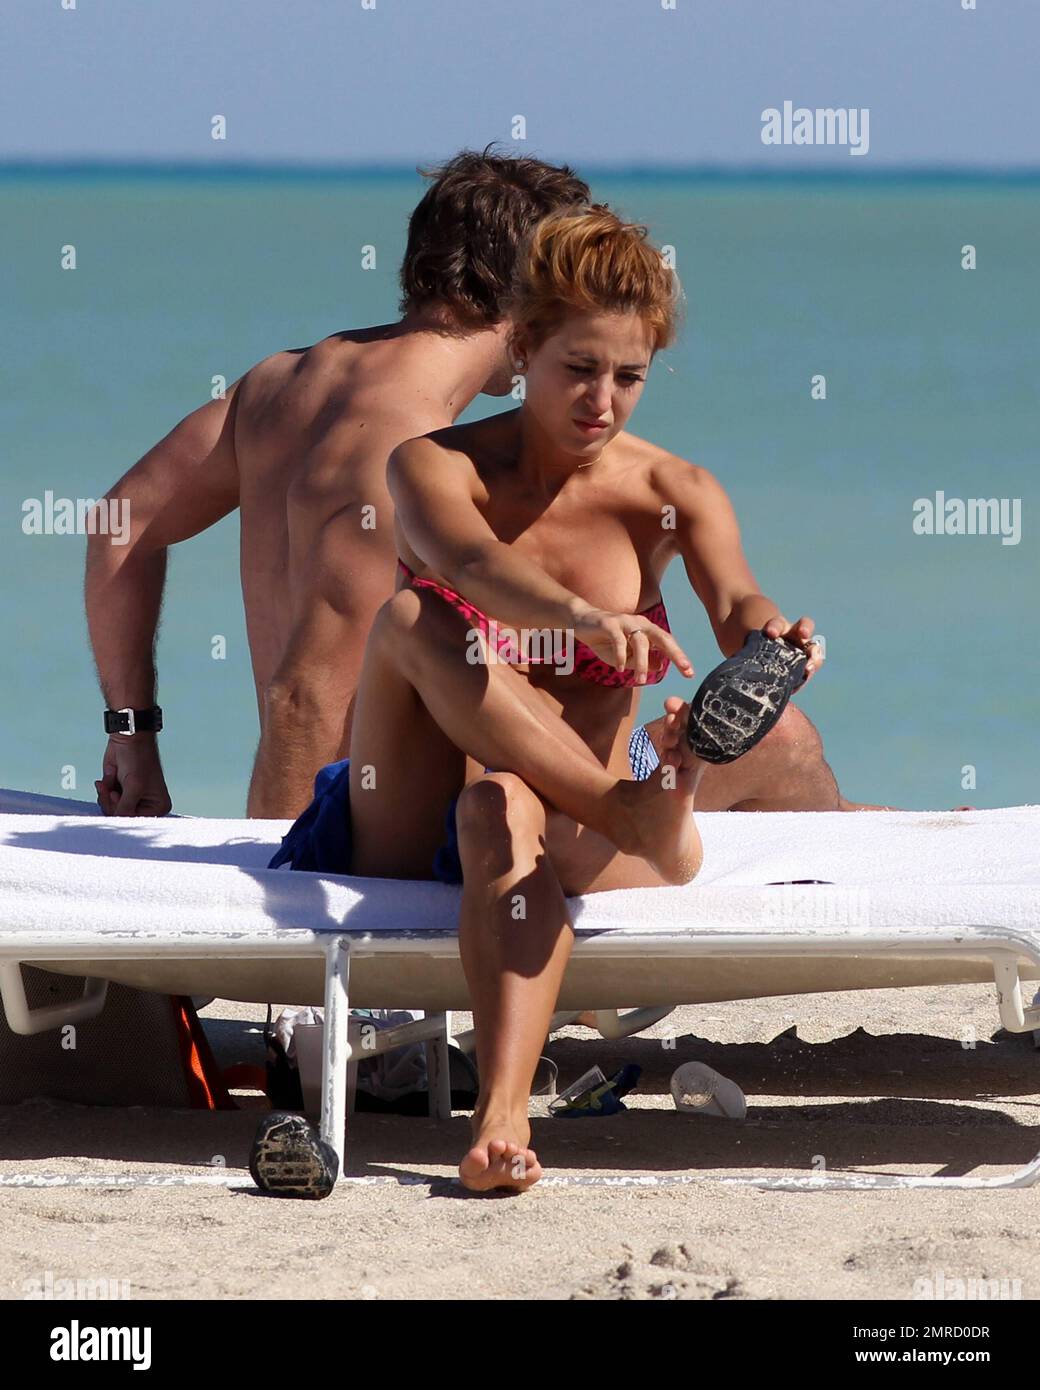 Argentine model, dancer and vedette, Jessica Cirio shows a bit more than intended as her bikini top slips while getting dressed. Cirio wore a pink patterned bikini while soaking up the sun with a male companion before heading back to their hotel. Miami Beach, FL. 29th October 2012. Stock Photo